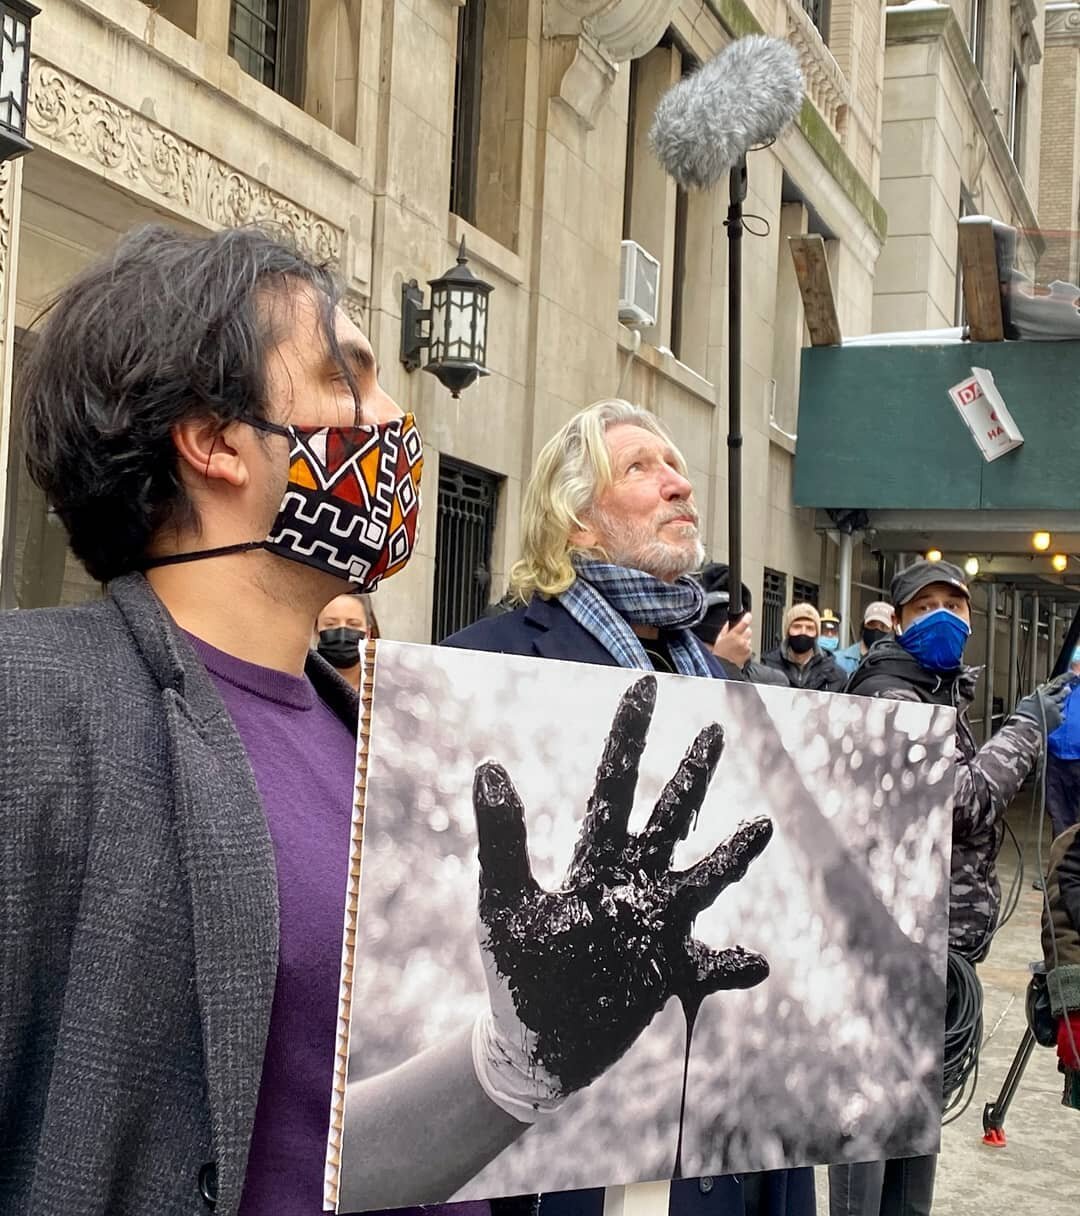 Just another morning on the #upperwestside with the legendary @rogerwaters.

Together we're standing up for @stevendonziger and the people of Ecuador in their struggle against #chevron, Big Oil &amp; the corporate law firms protecting them.

Photo by